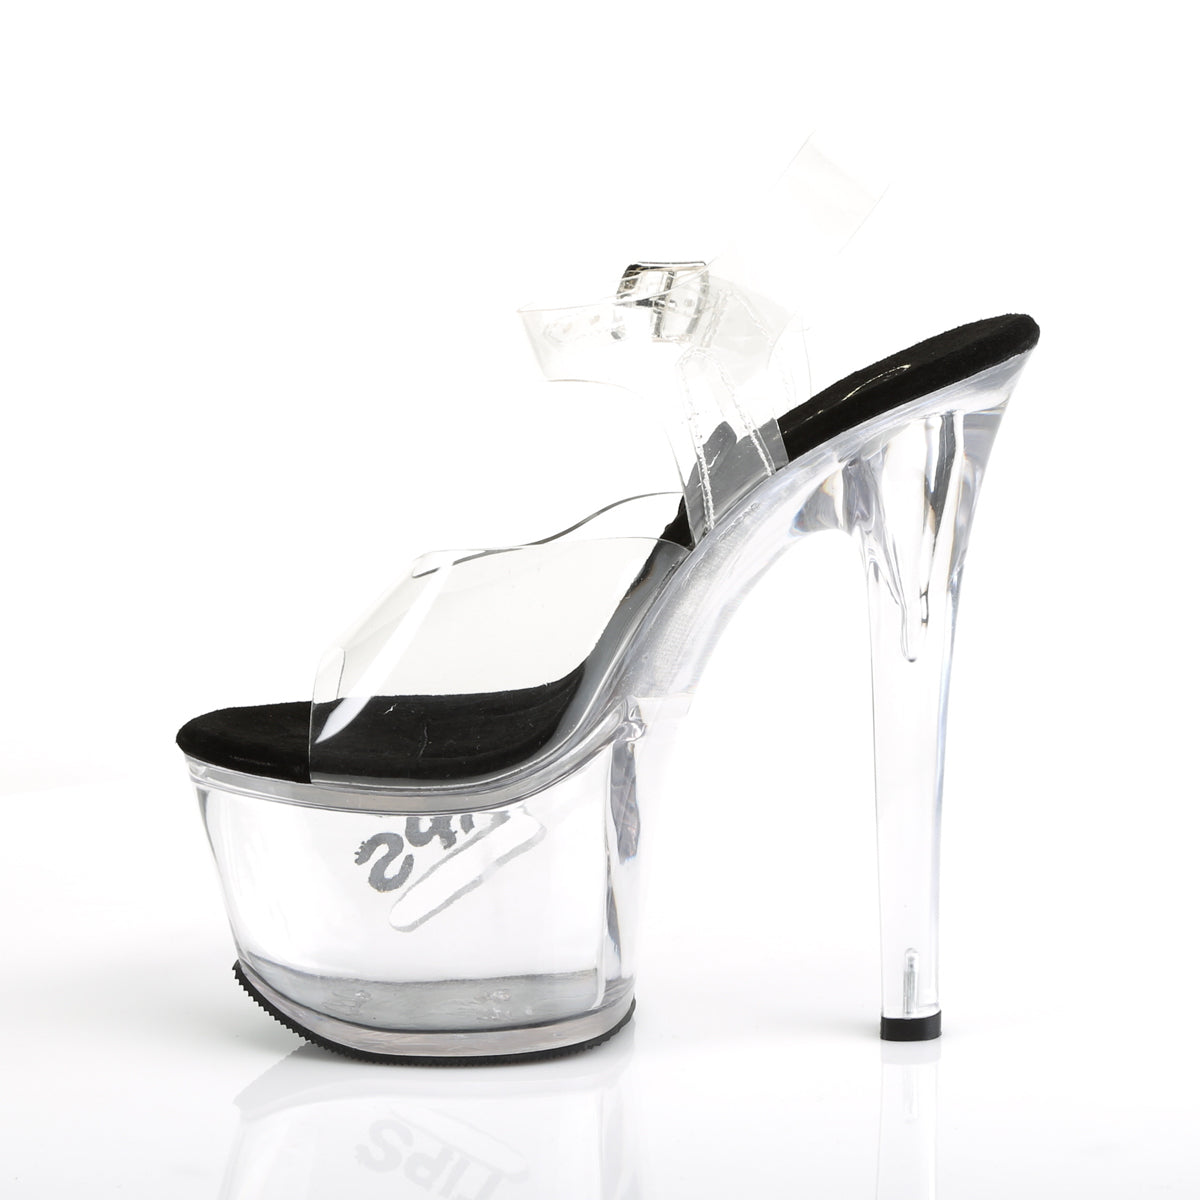 TIPJAR-708-5 7" Heel Clear and Black Pole Dancing Platforms-Pleaser- Sexy Shoes Pole Dance Heels